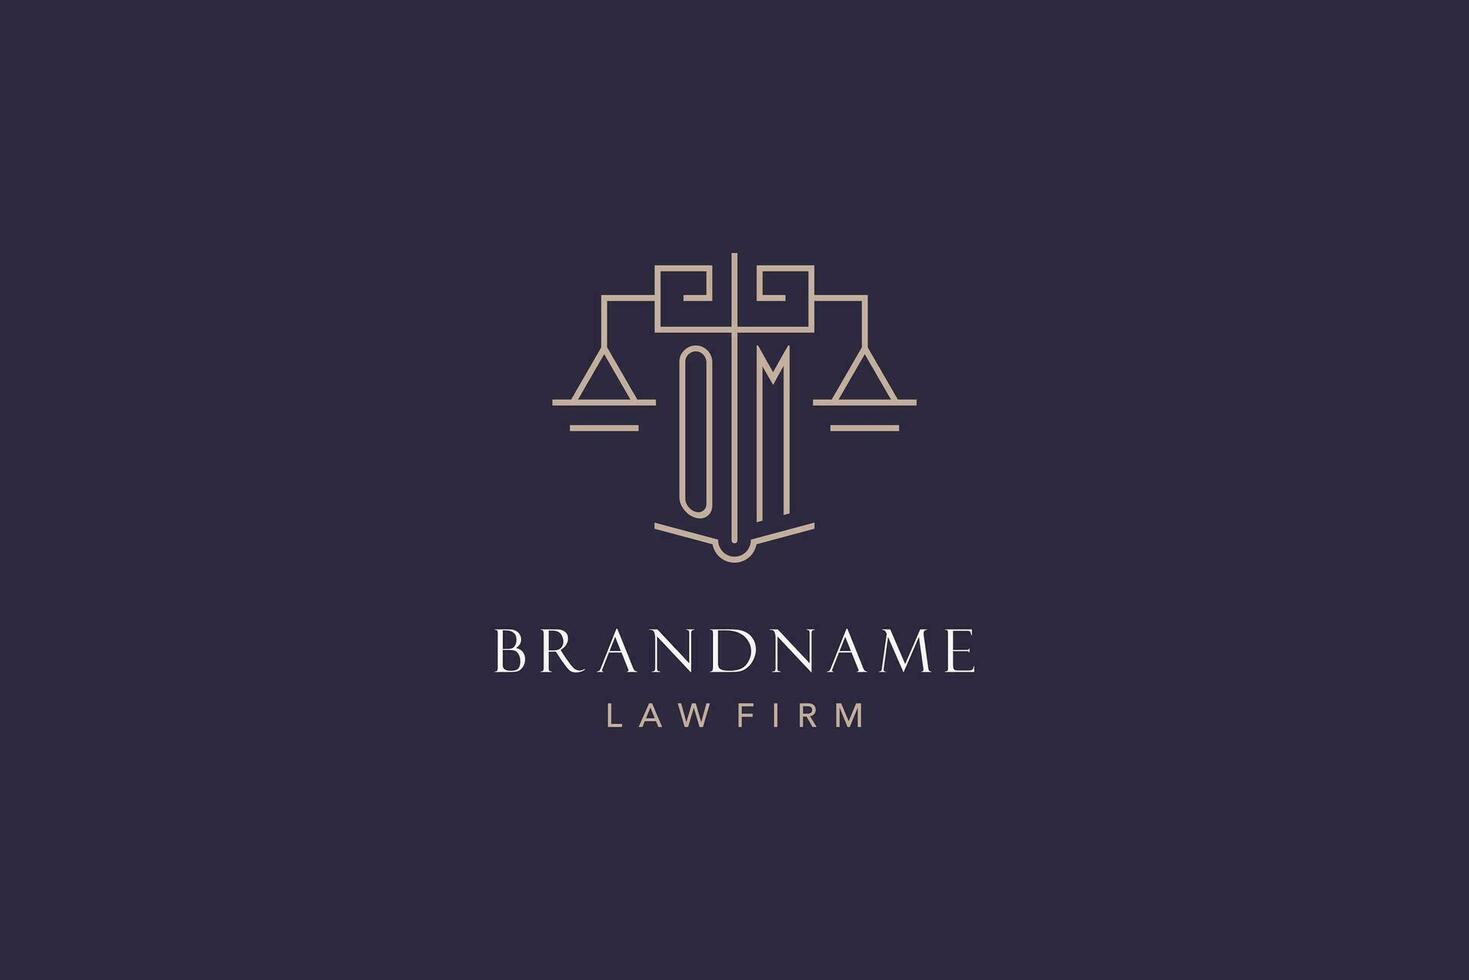 Initial letter OM logo with scale of justice logo design, luxury legal logo geometric style vector